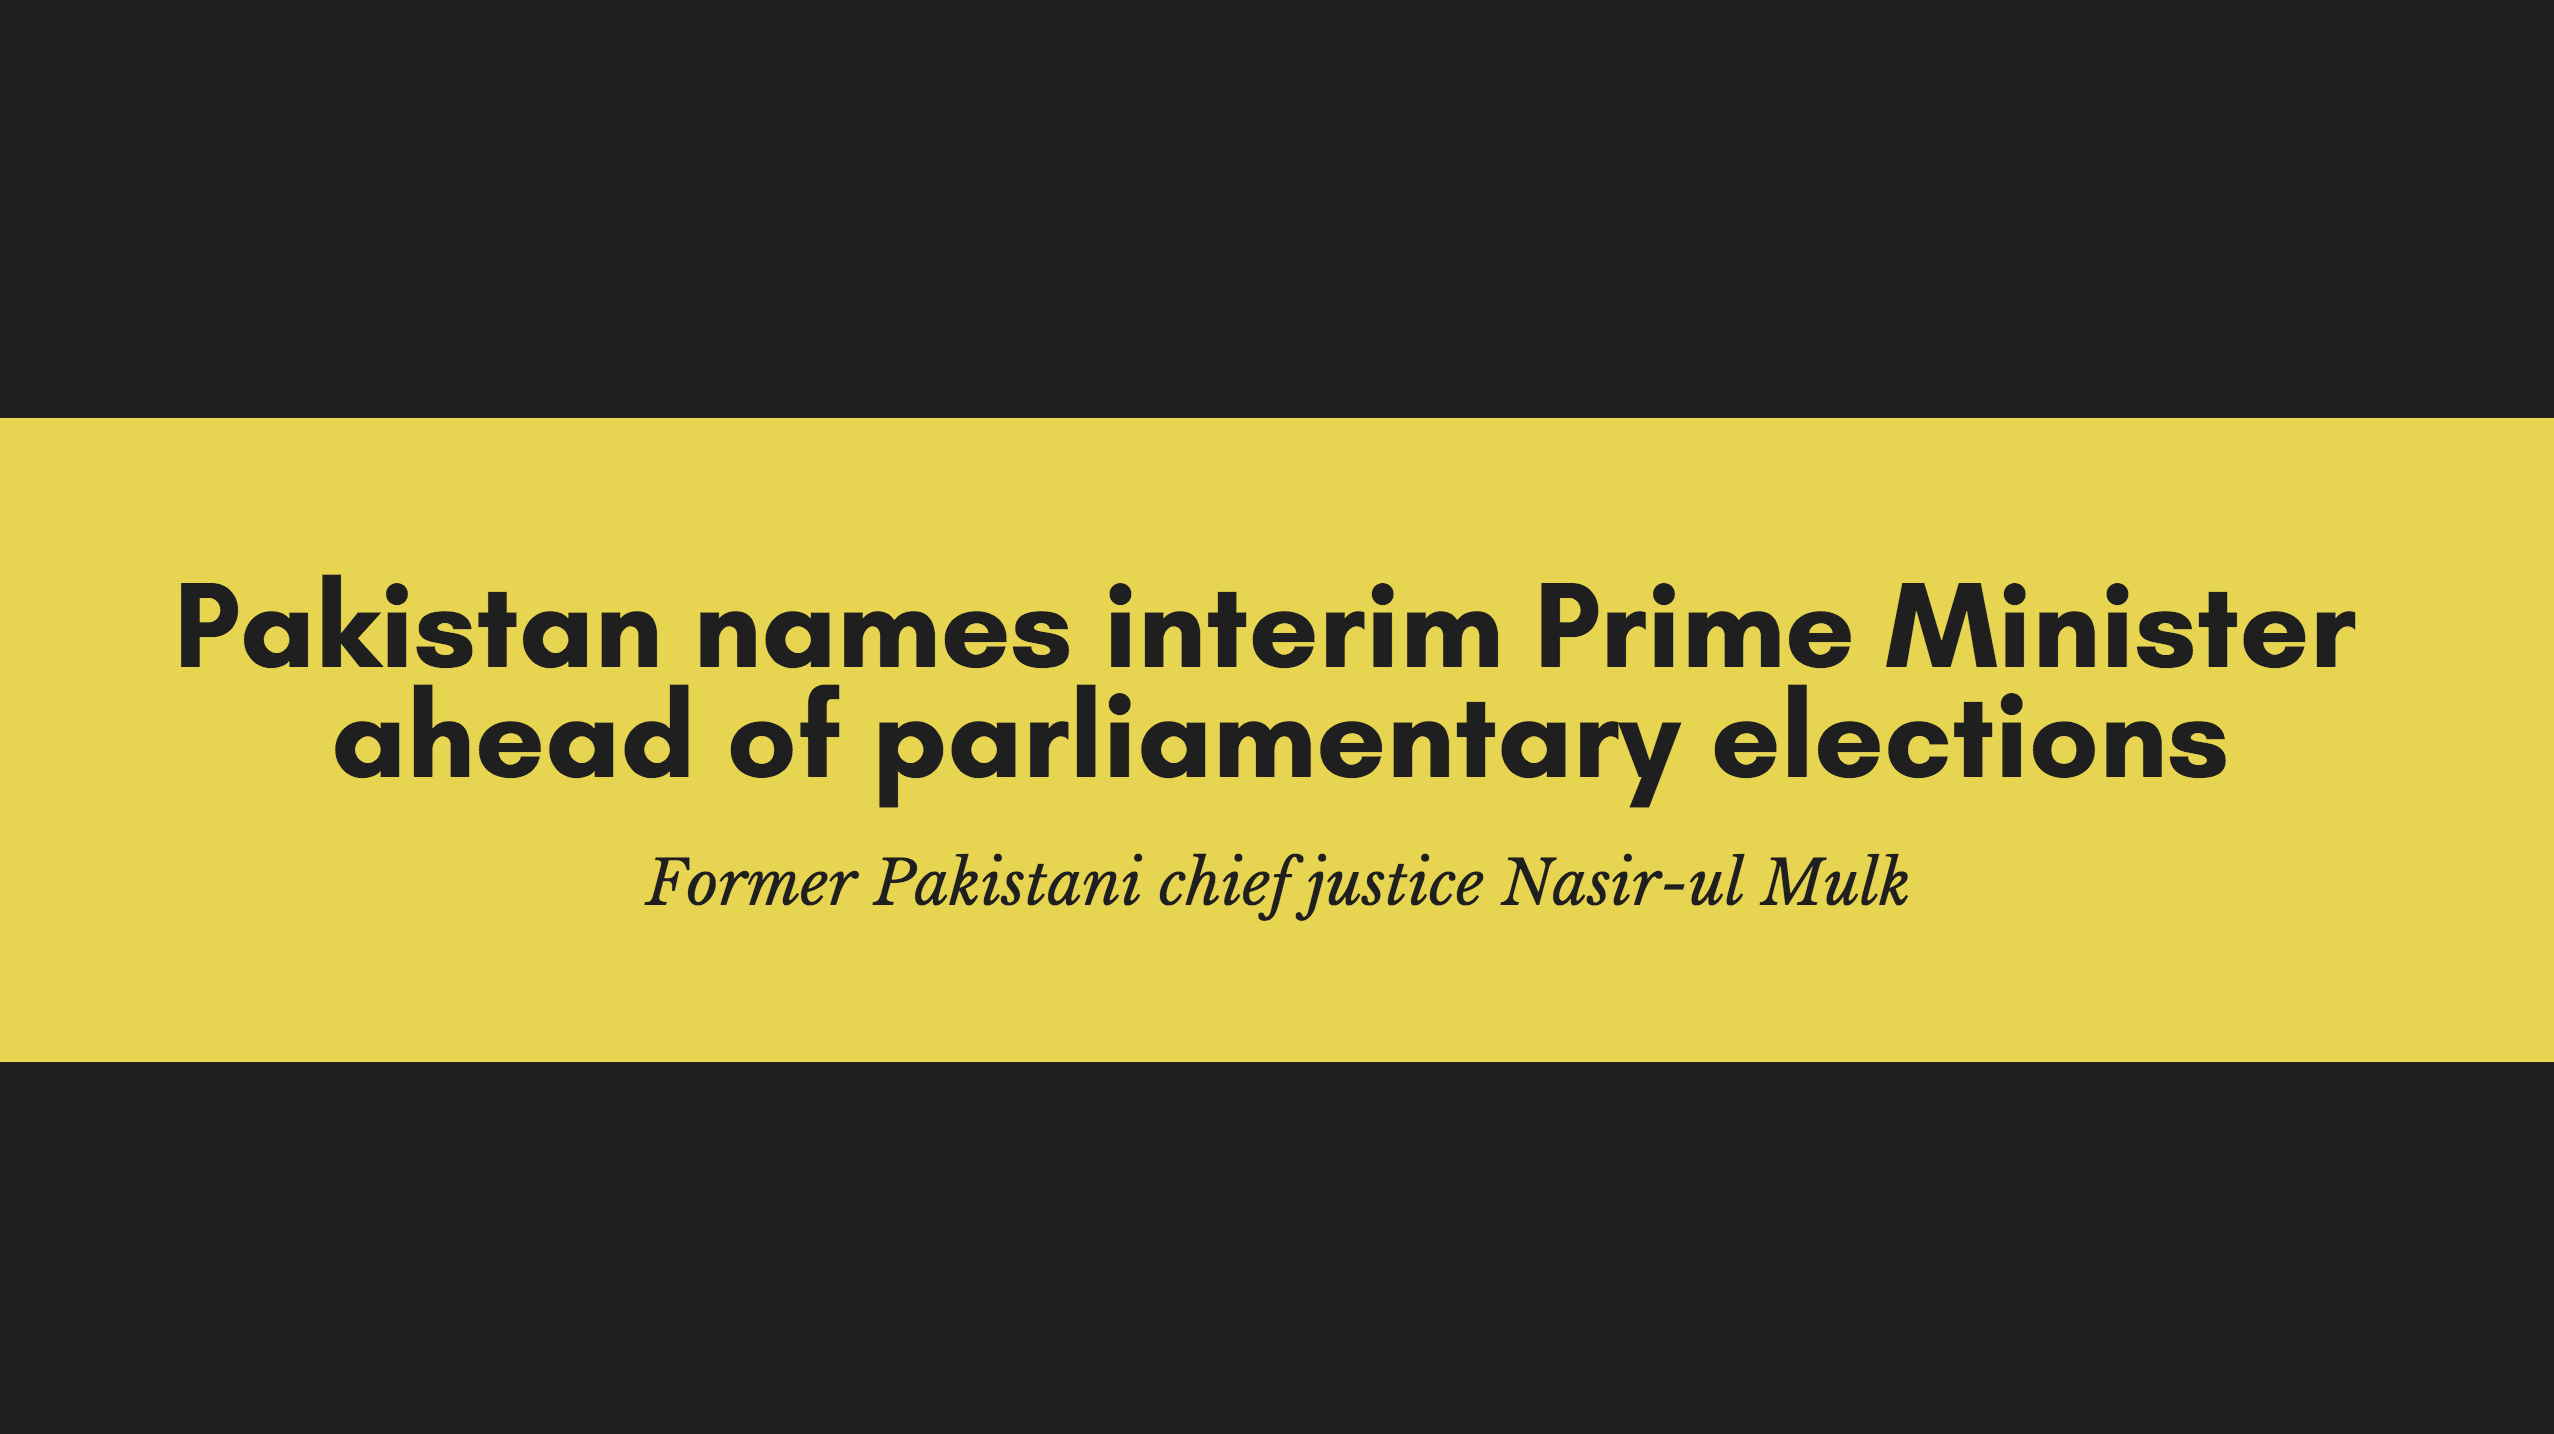 Pakistan names interim Prime Minister ahead of parliamentary elections